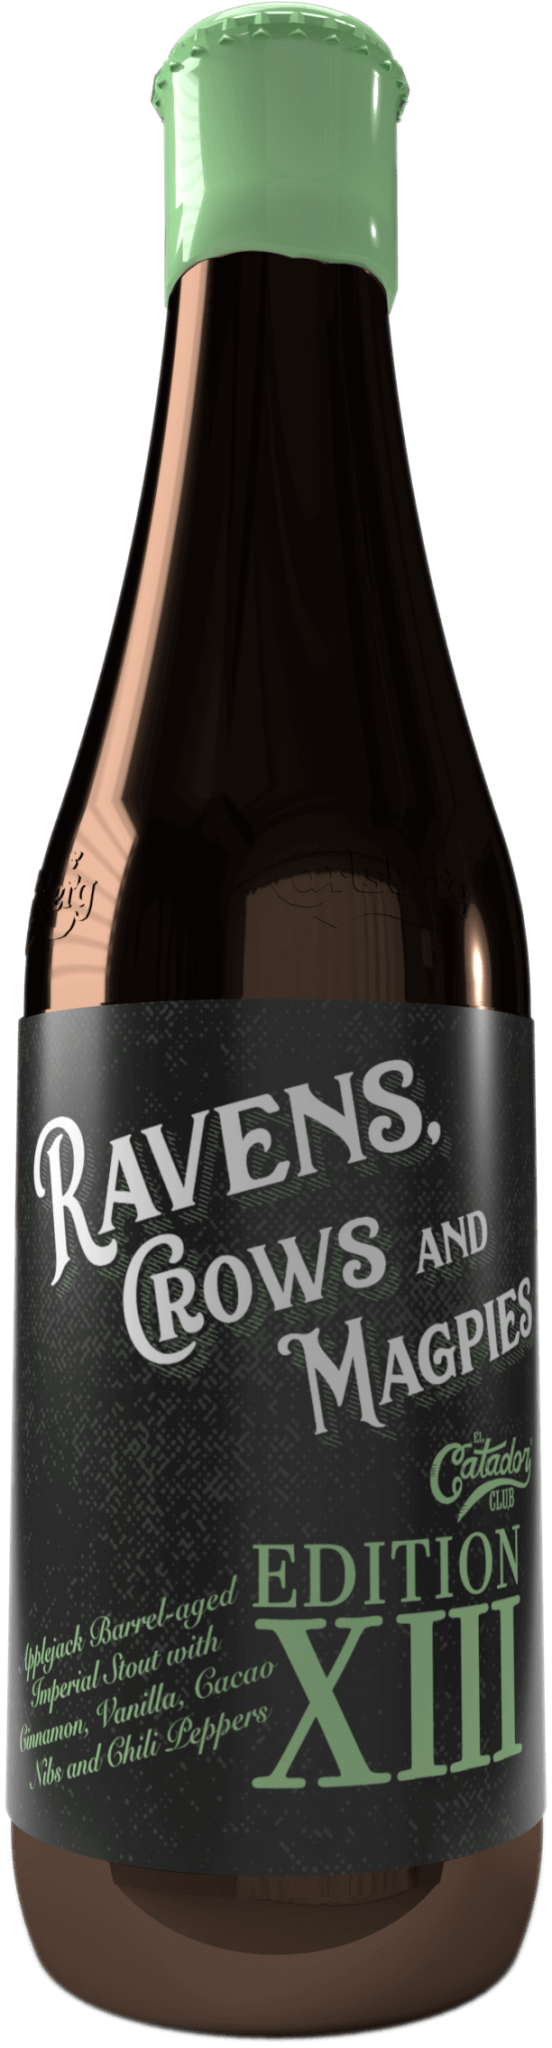 Ravens, Crows, and Magpies